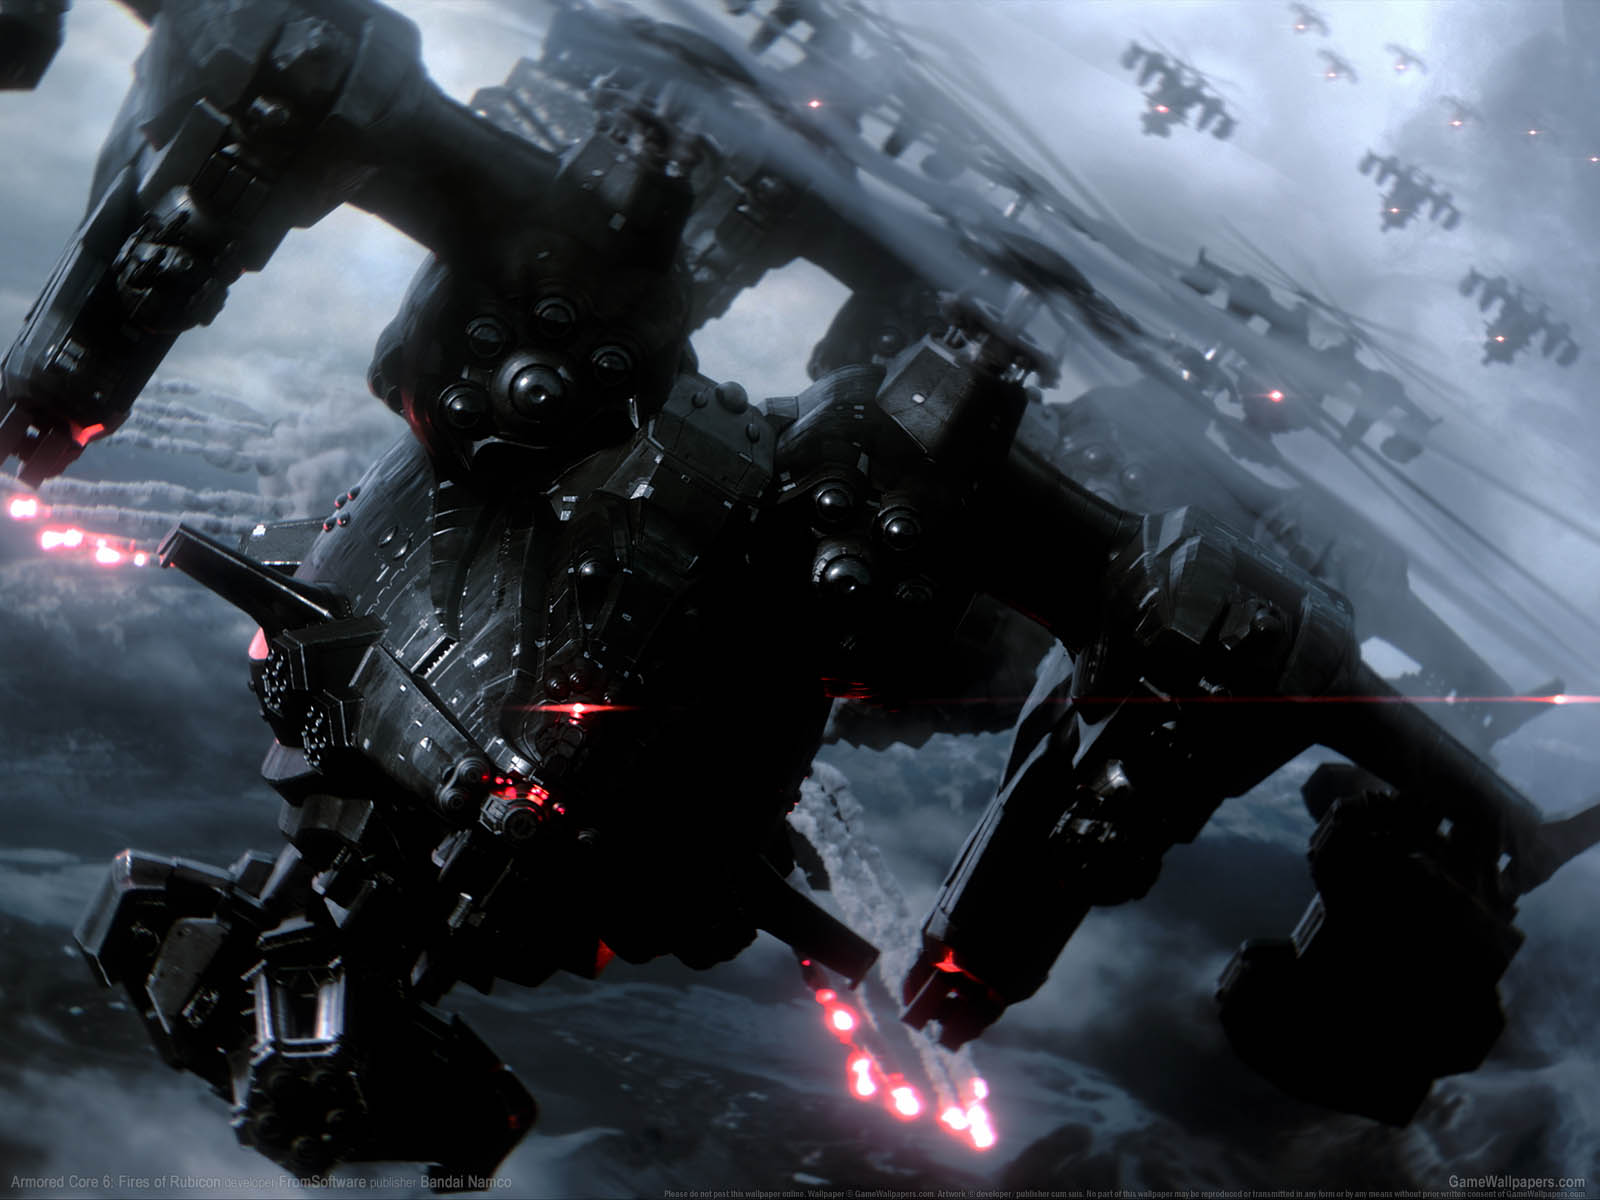 Armored Core 6%253A Fires of Rubicon fond d'cran 02 1600x1200